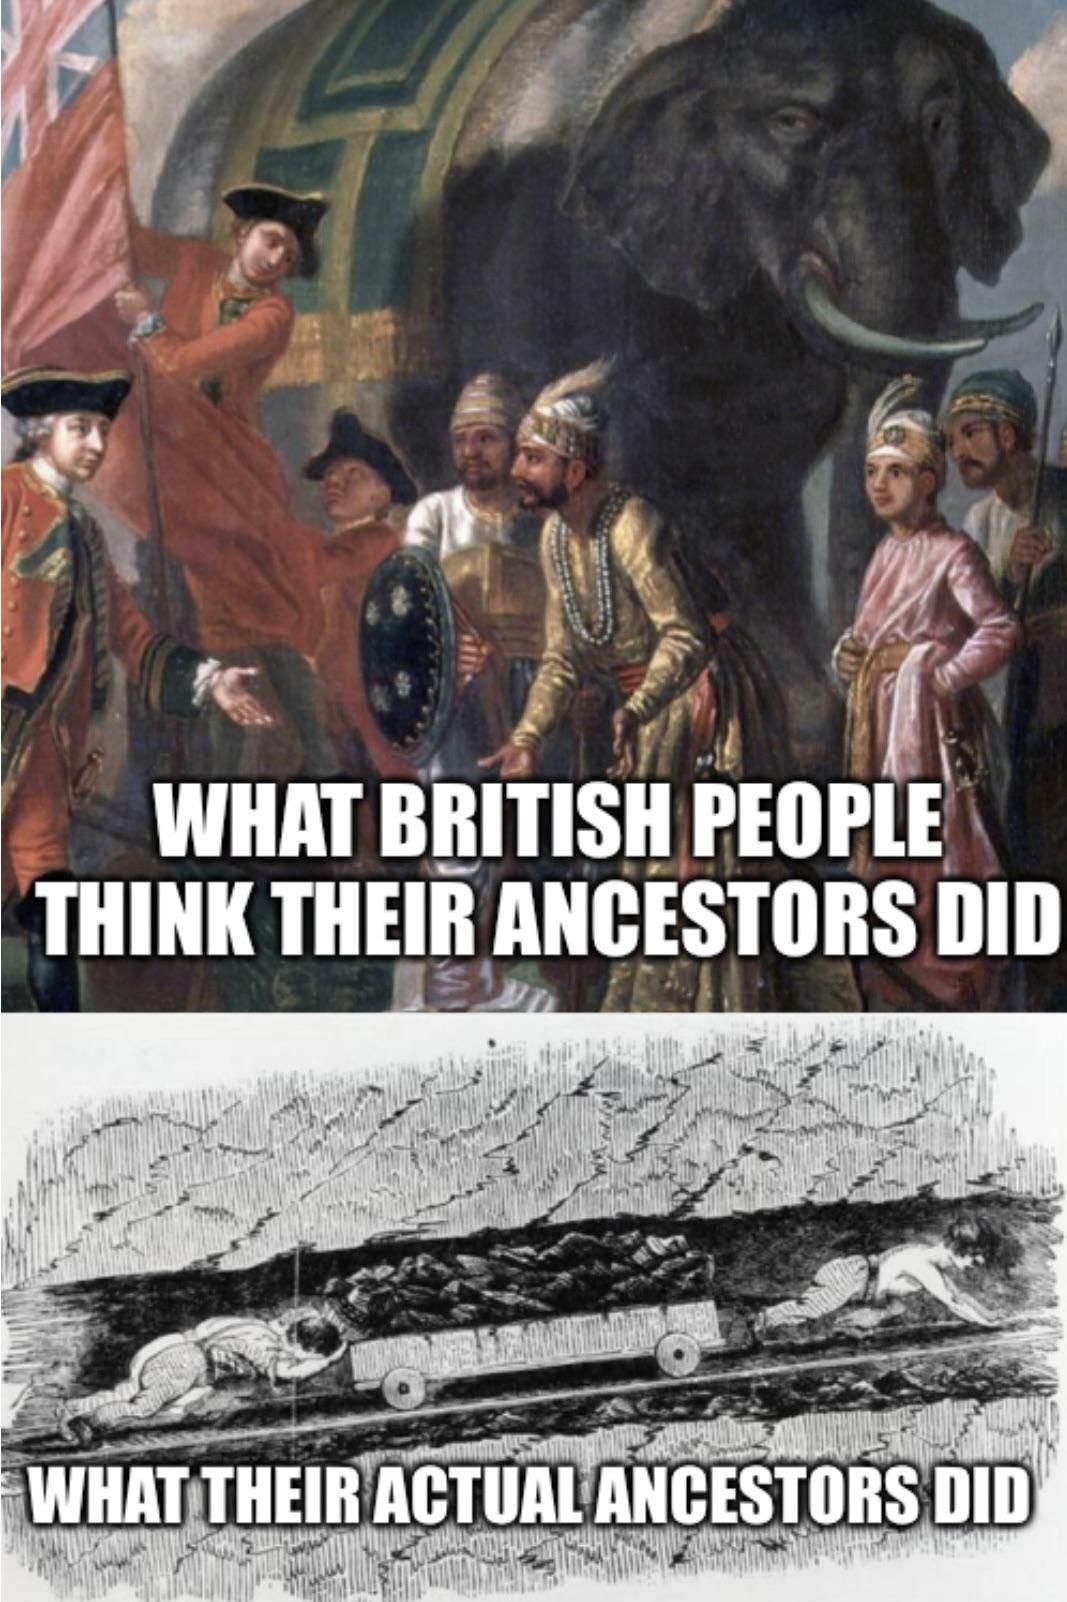 The past was universally horrible for 99% of people. Unless you were a member of a tight oligopoly you were cannon fodder. That is true for all nations not just the Brits